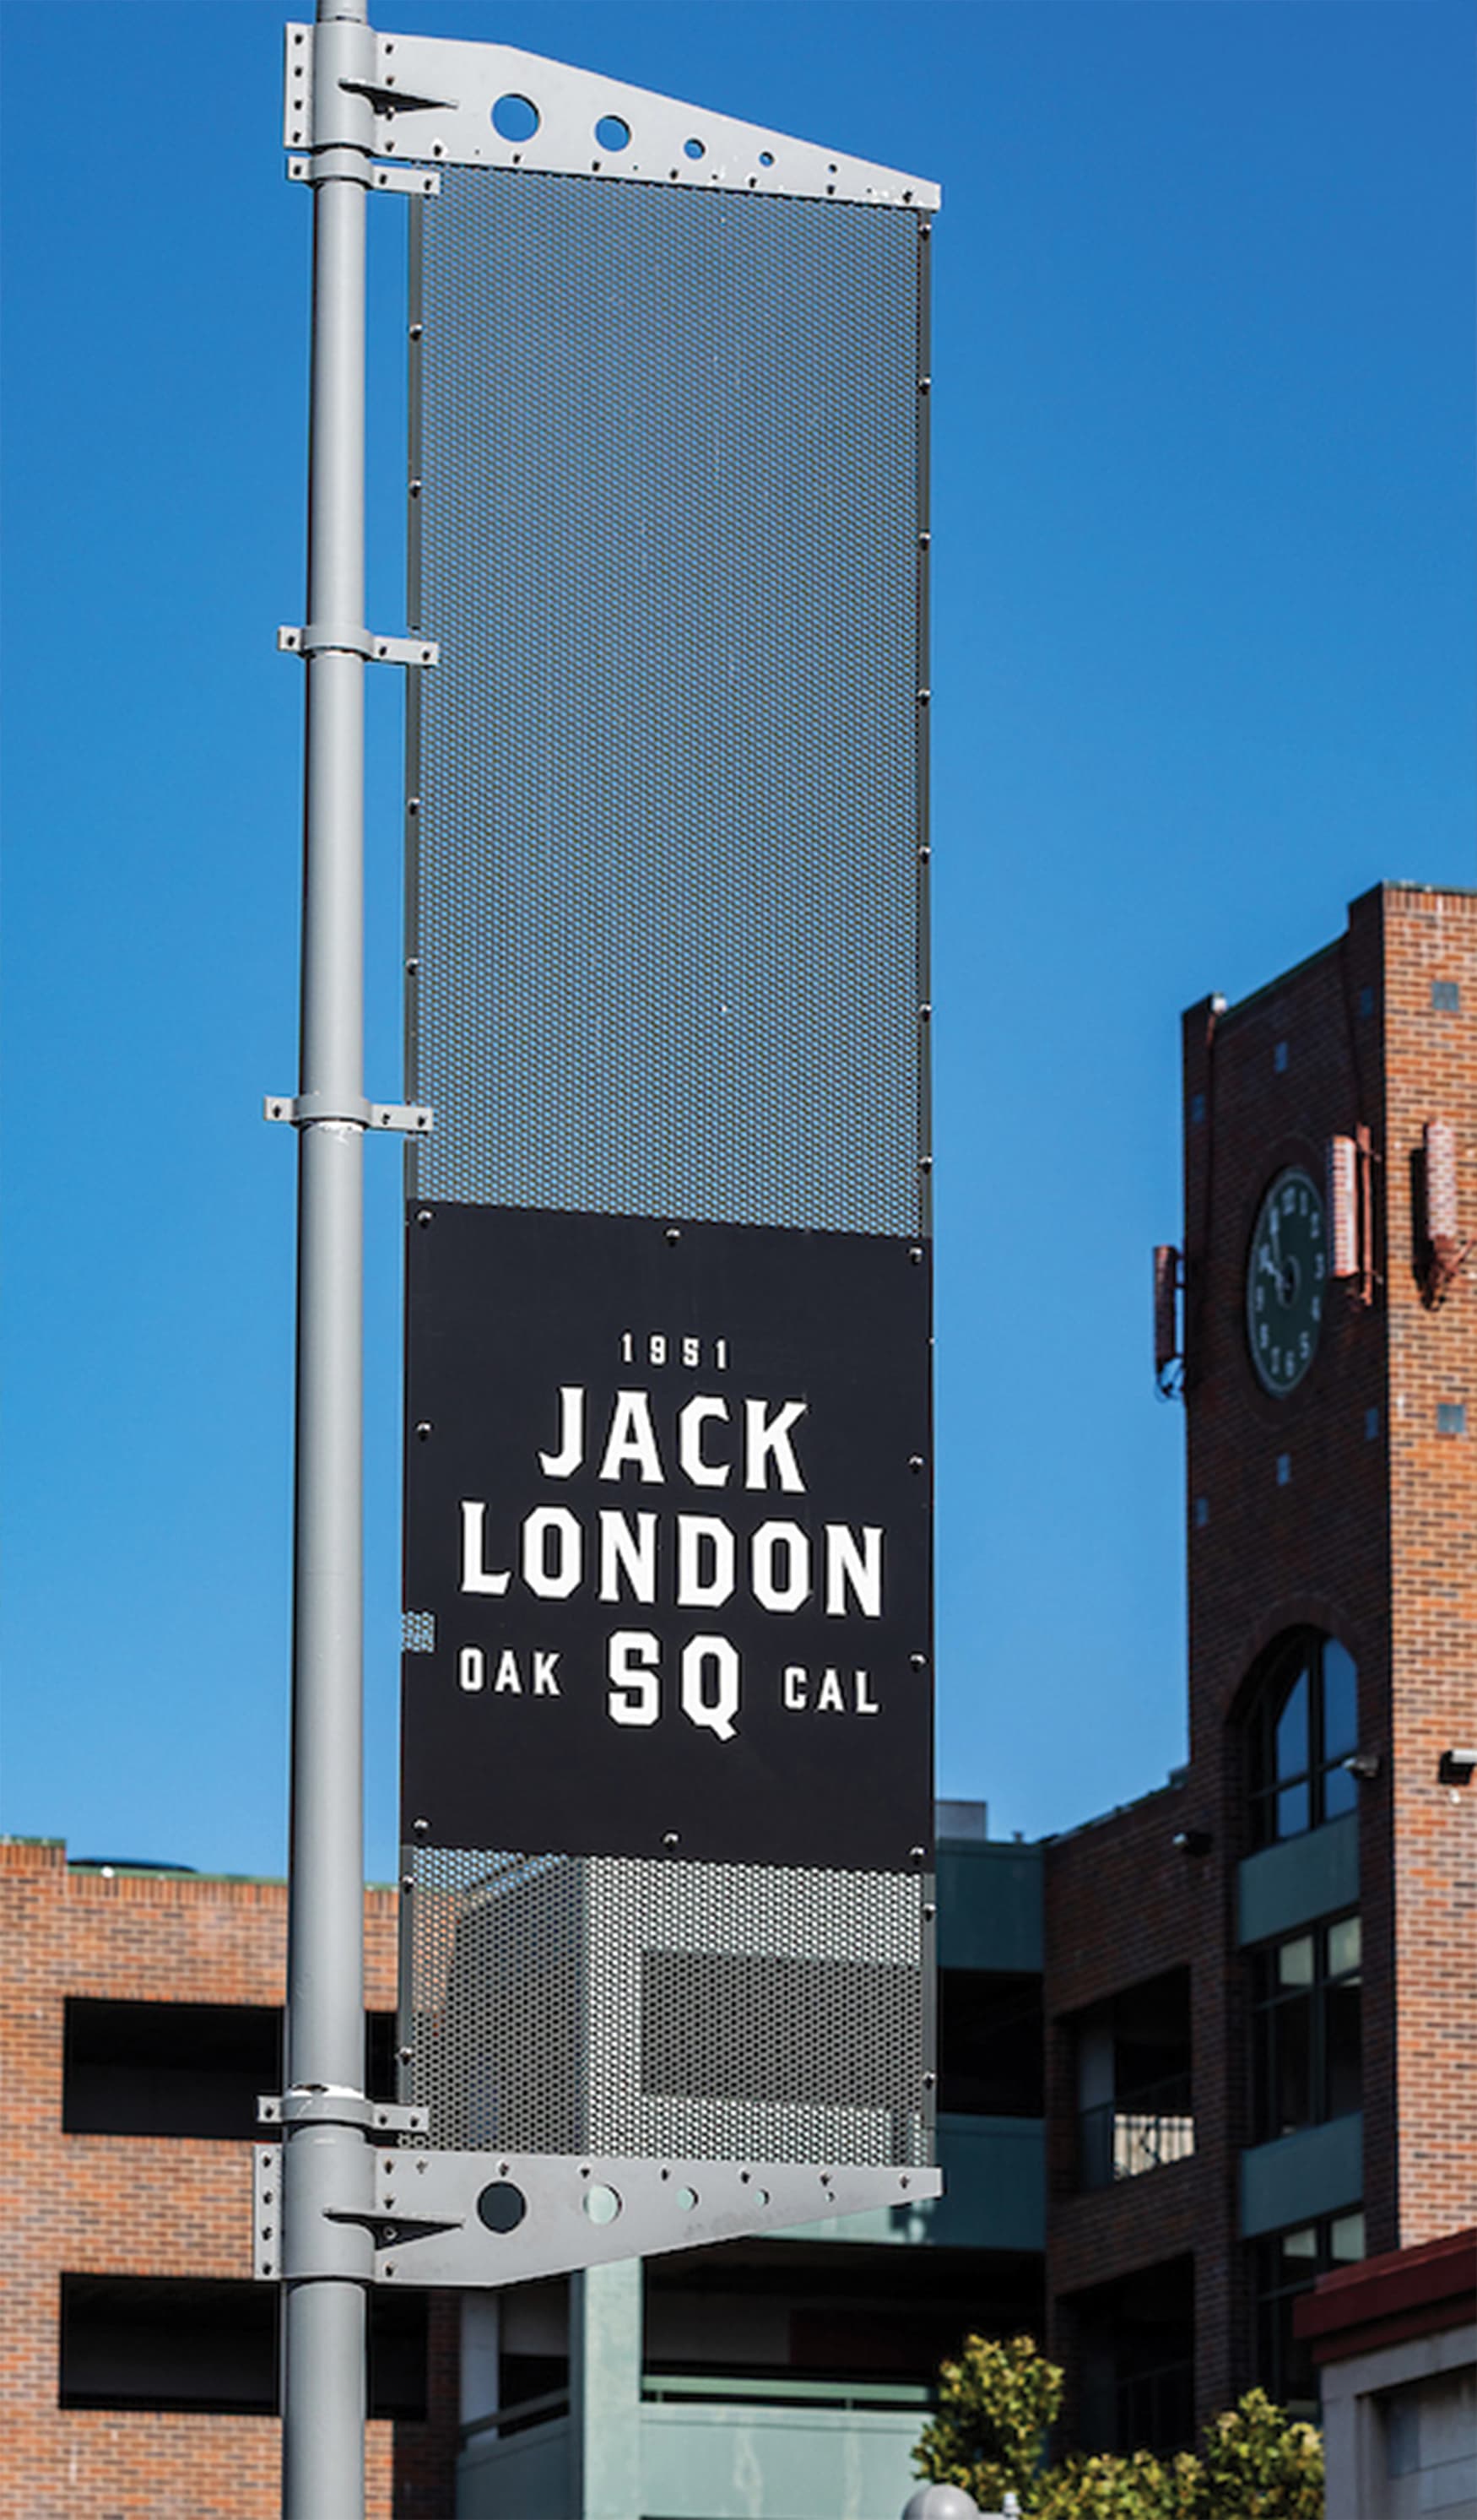 Jack London Square placemaking elements and identity signage.